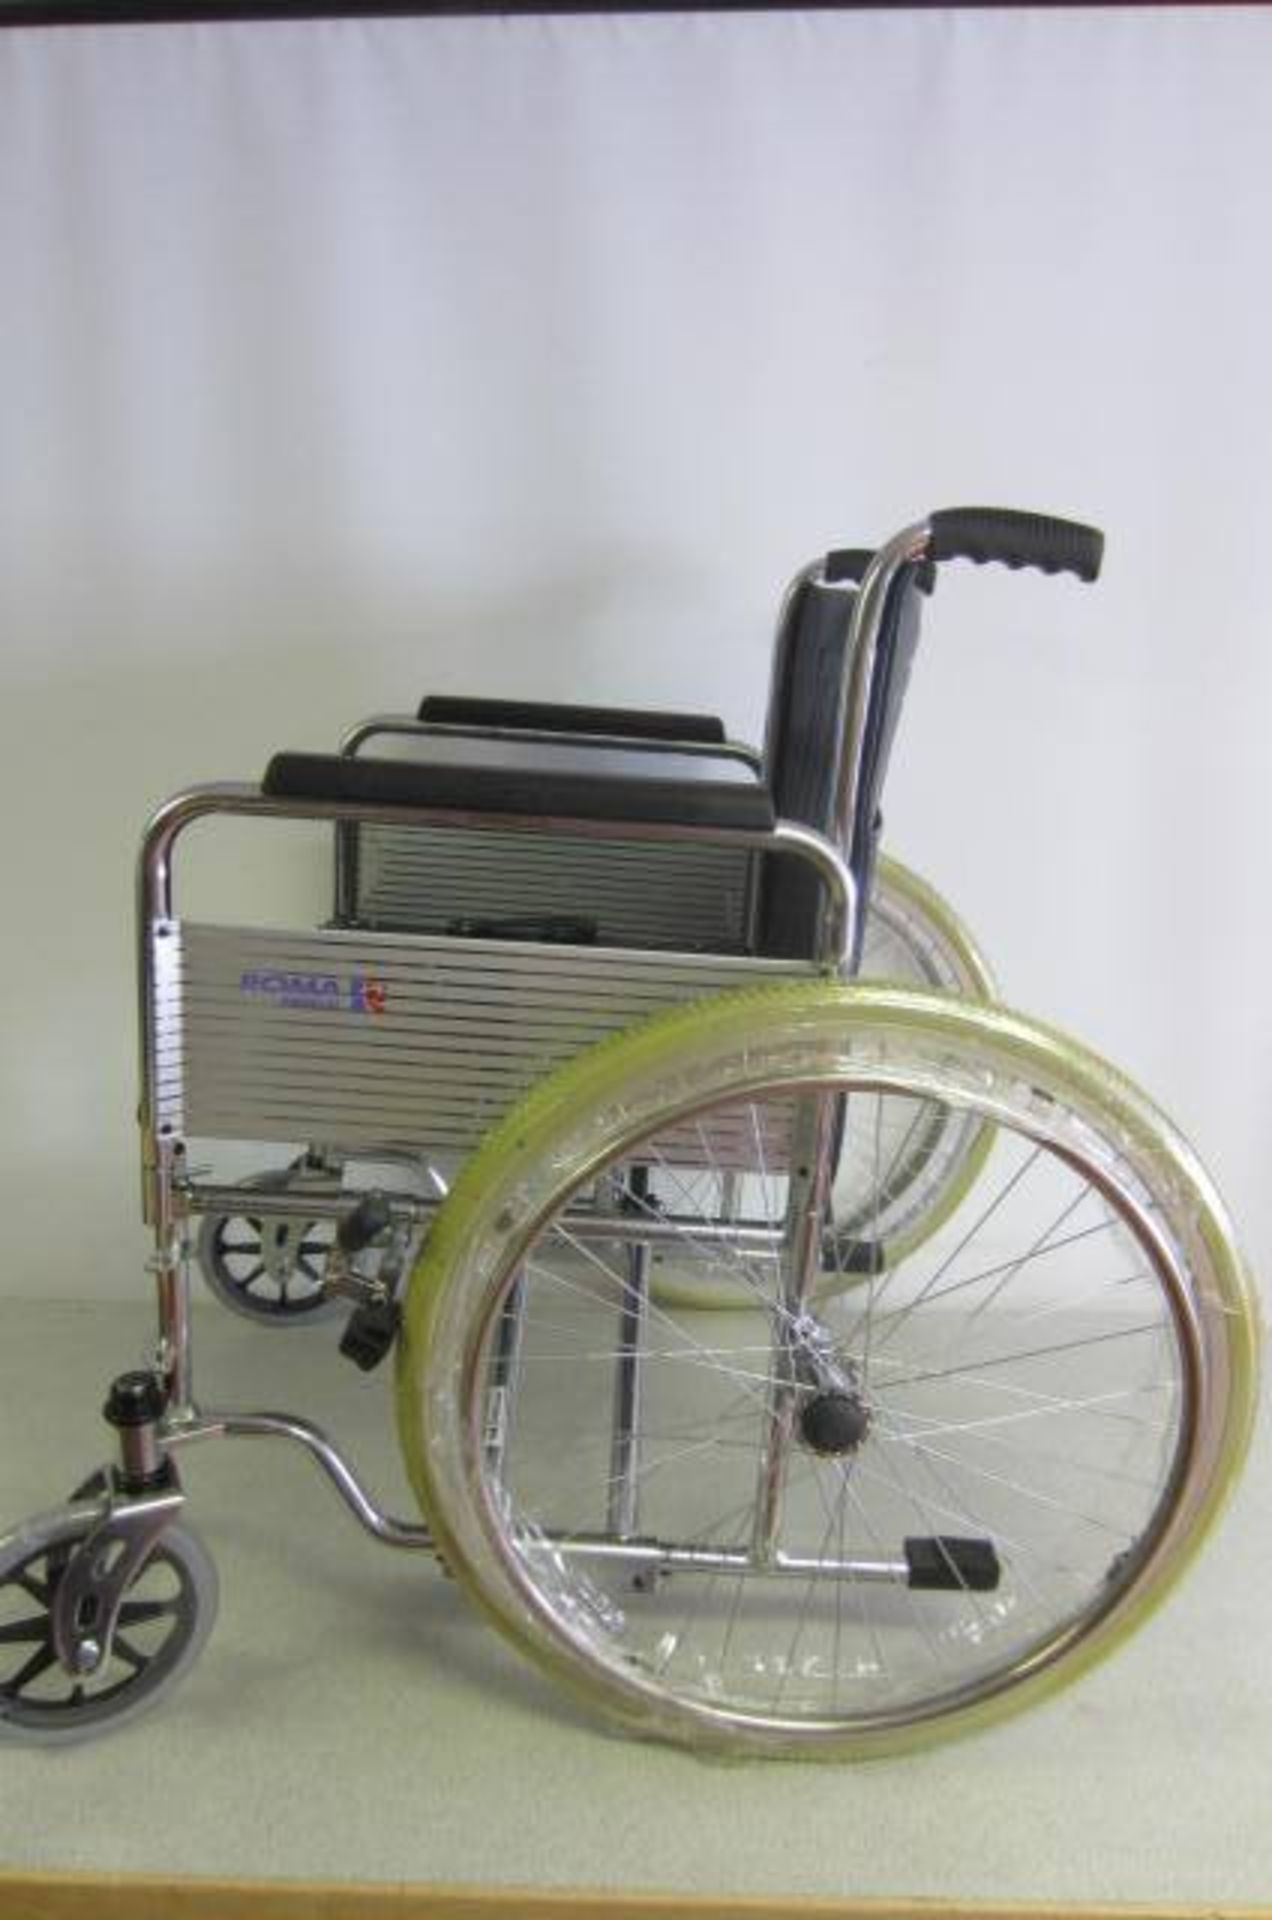 Roma Medical Heavy Duty Self Propelled Wheel Chair, Model 1472X. In Box as New. RRP £246.00 - Image 2 of 3